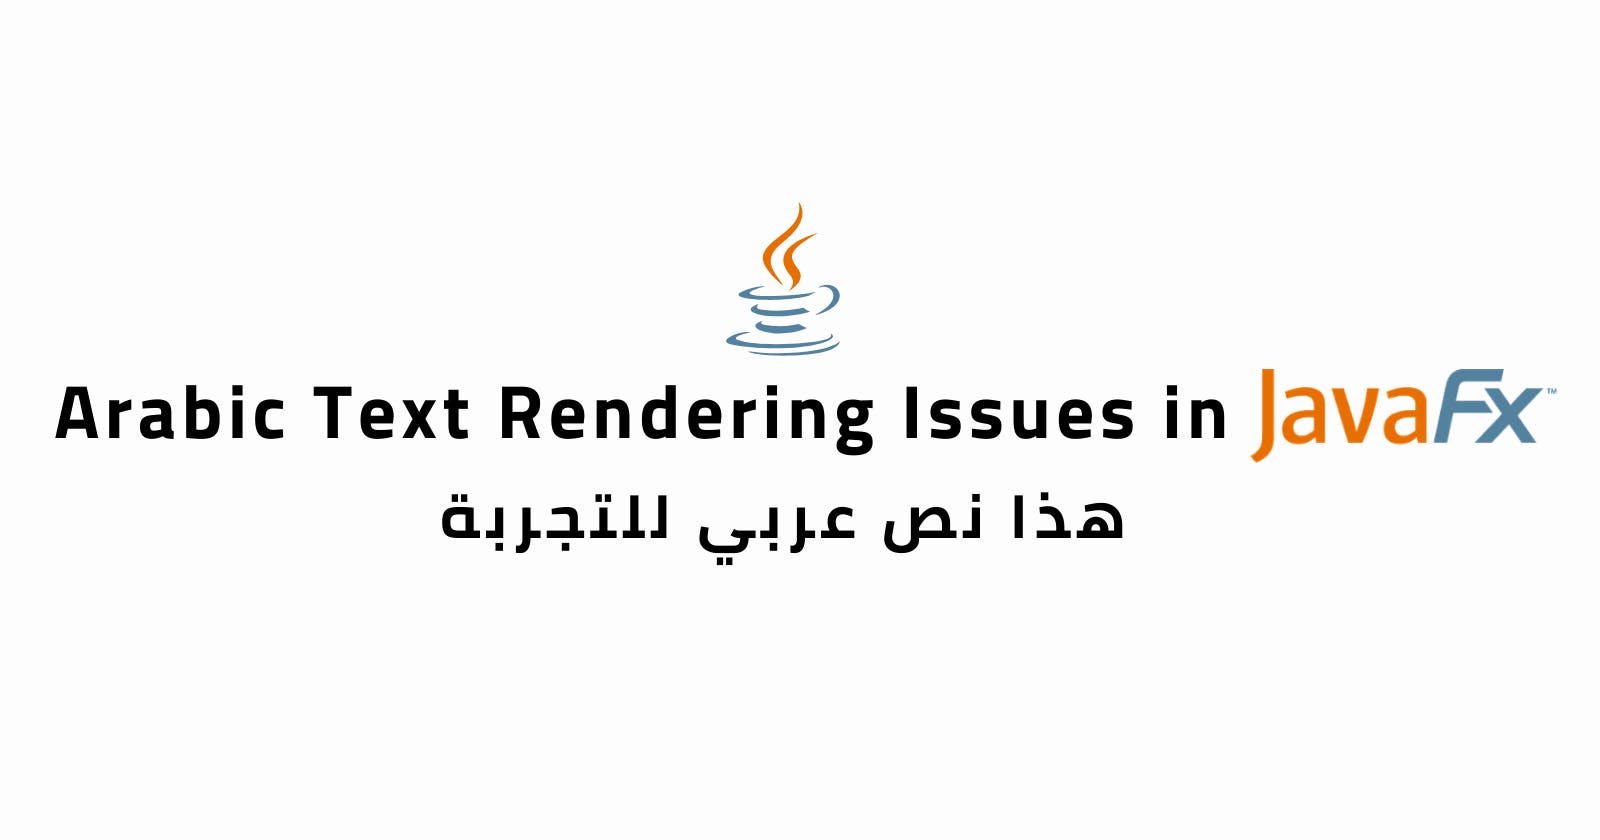 Arabic Text Rendering Issues in JavaFX